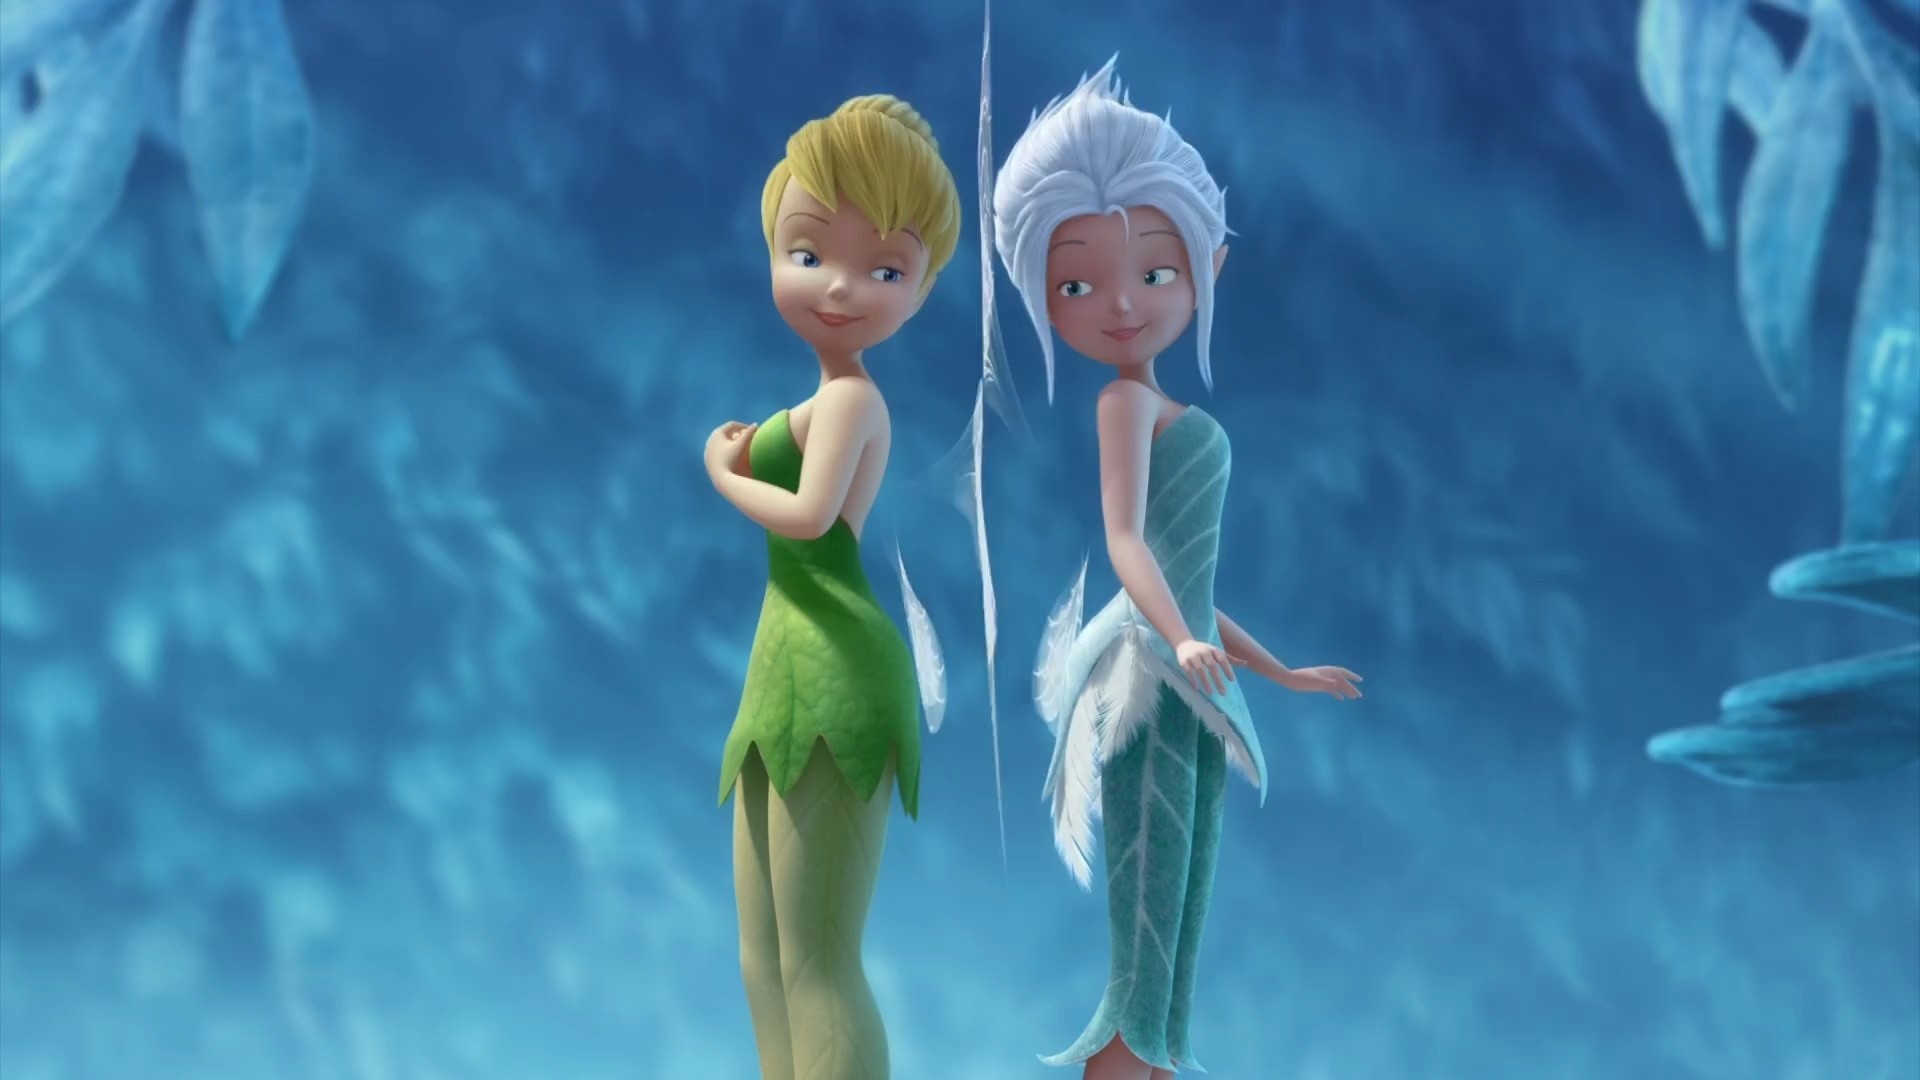 1920x1080 Tinker Bell and Her Sister - Bing Images